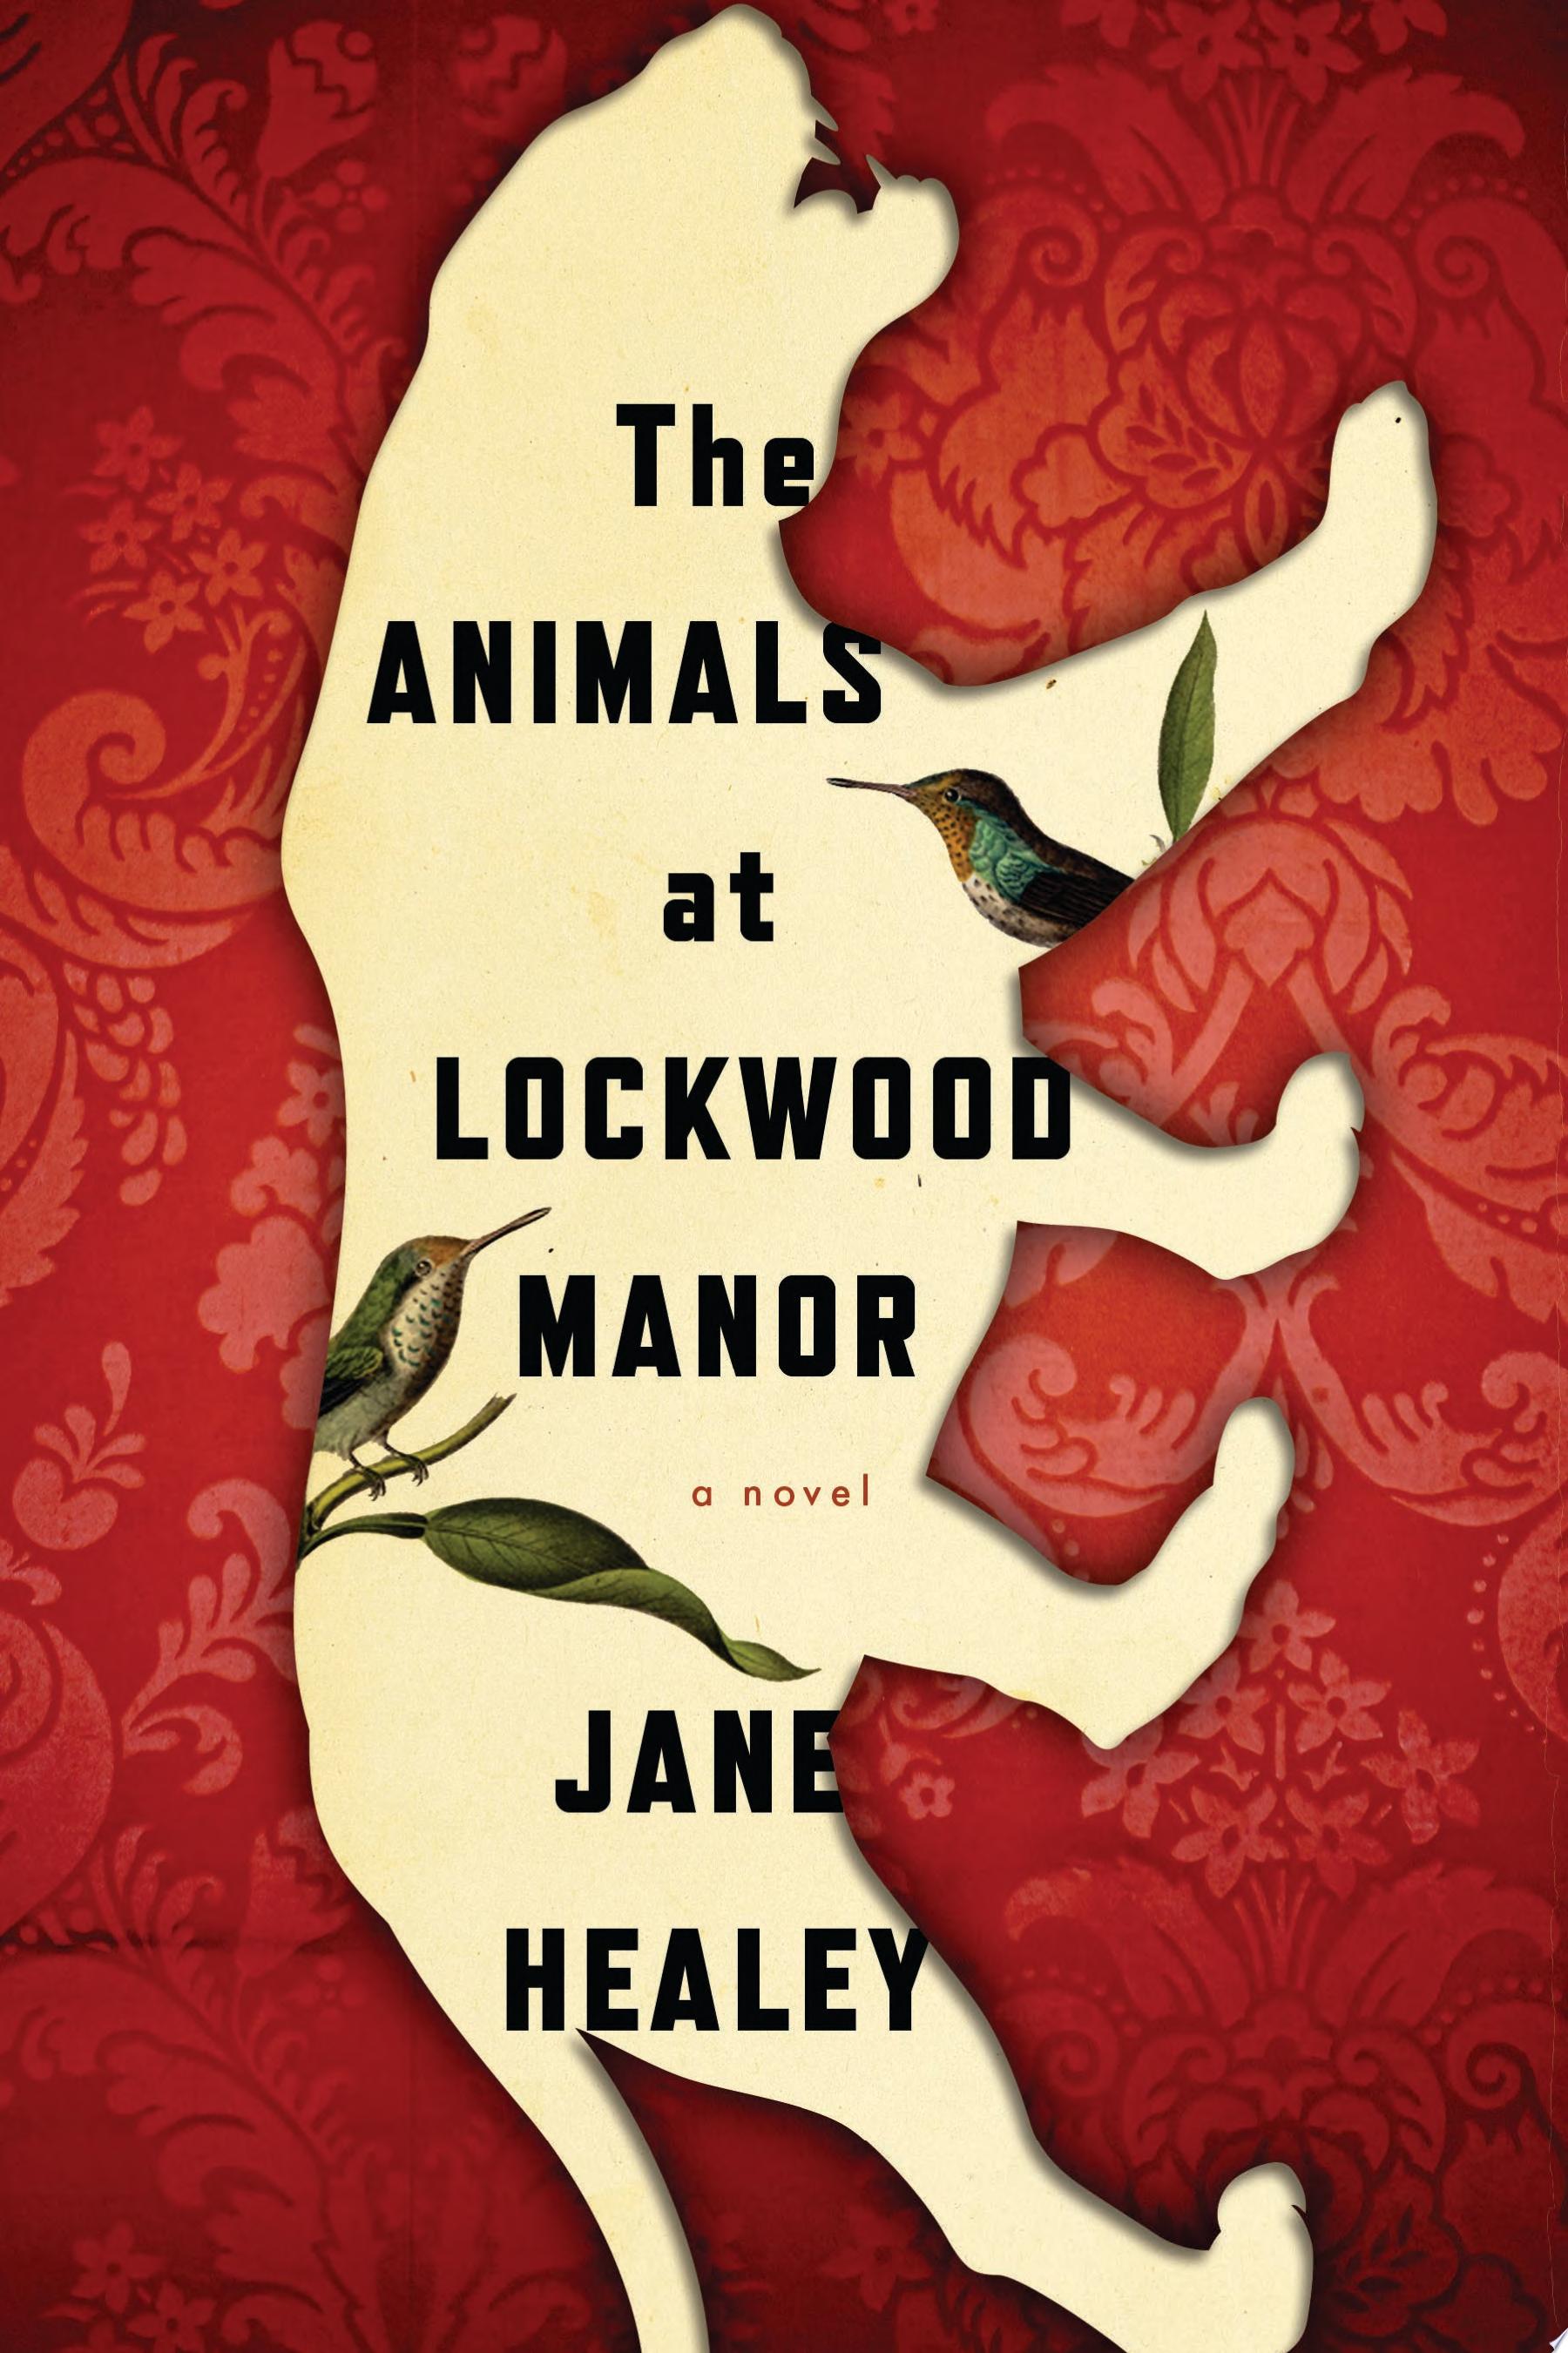 Image for "The Animals at Lockwood Manor"